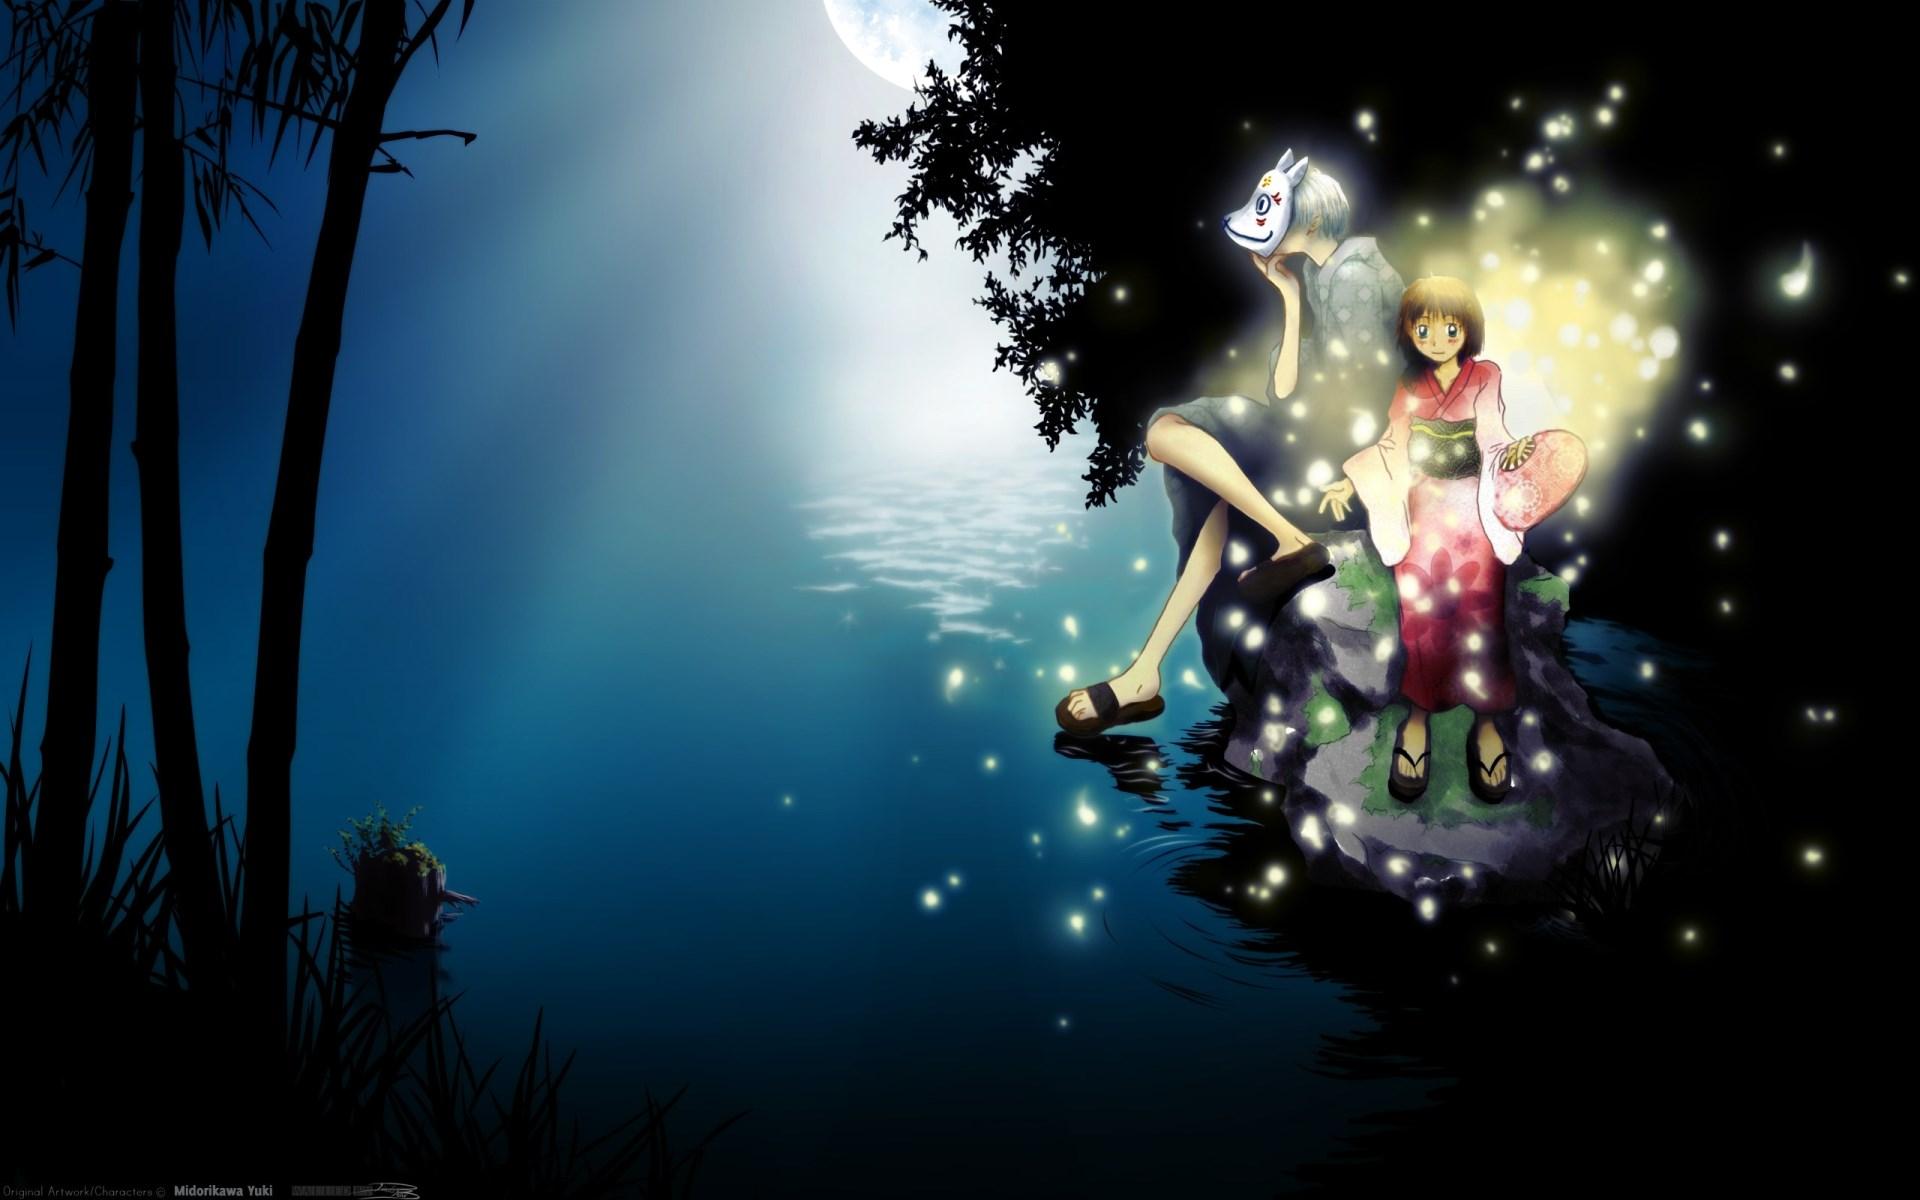 hd wallpaper into the forest of fireflies light. Movie